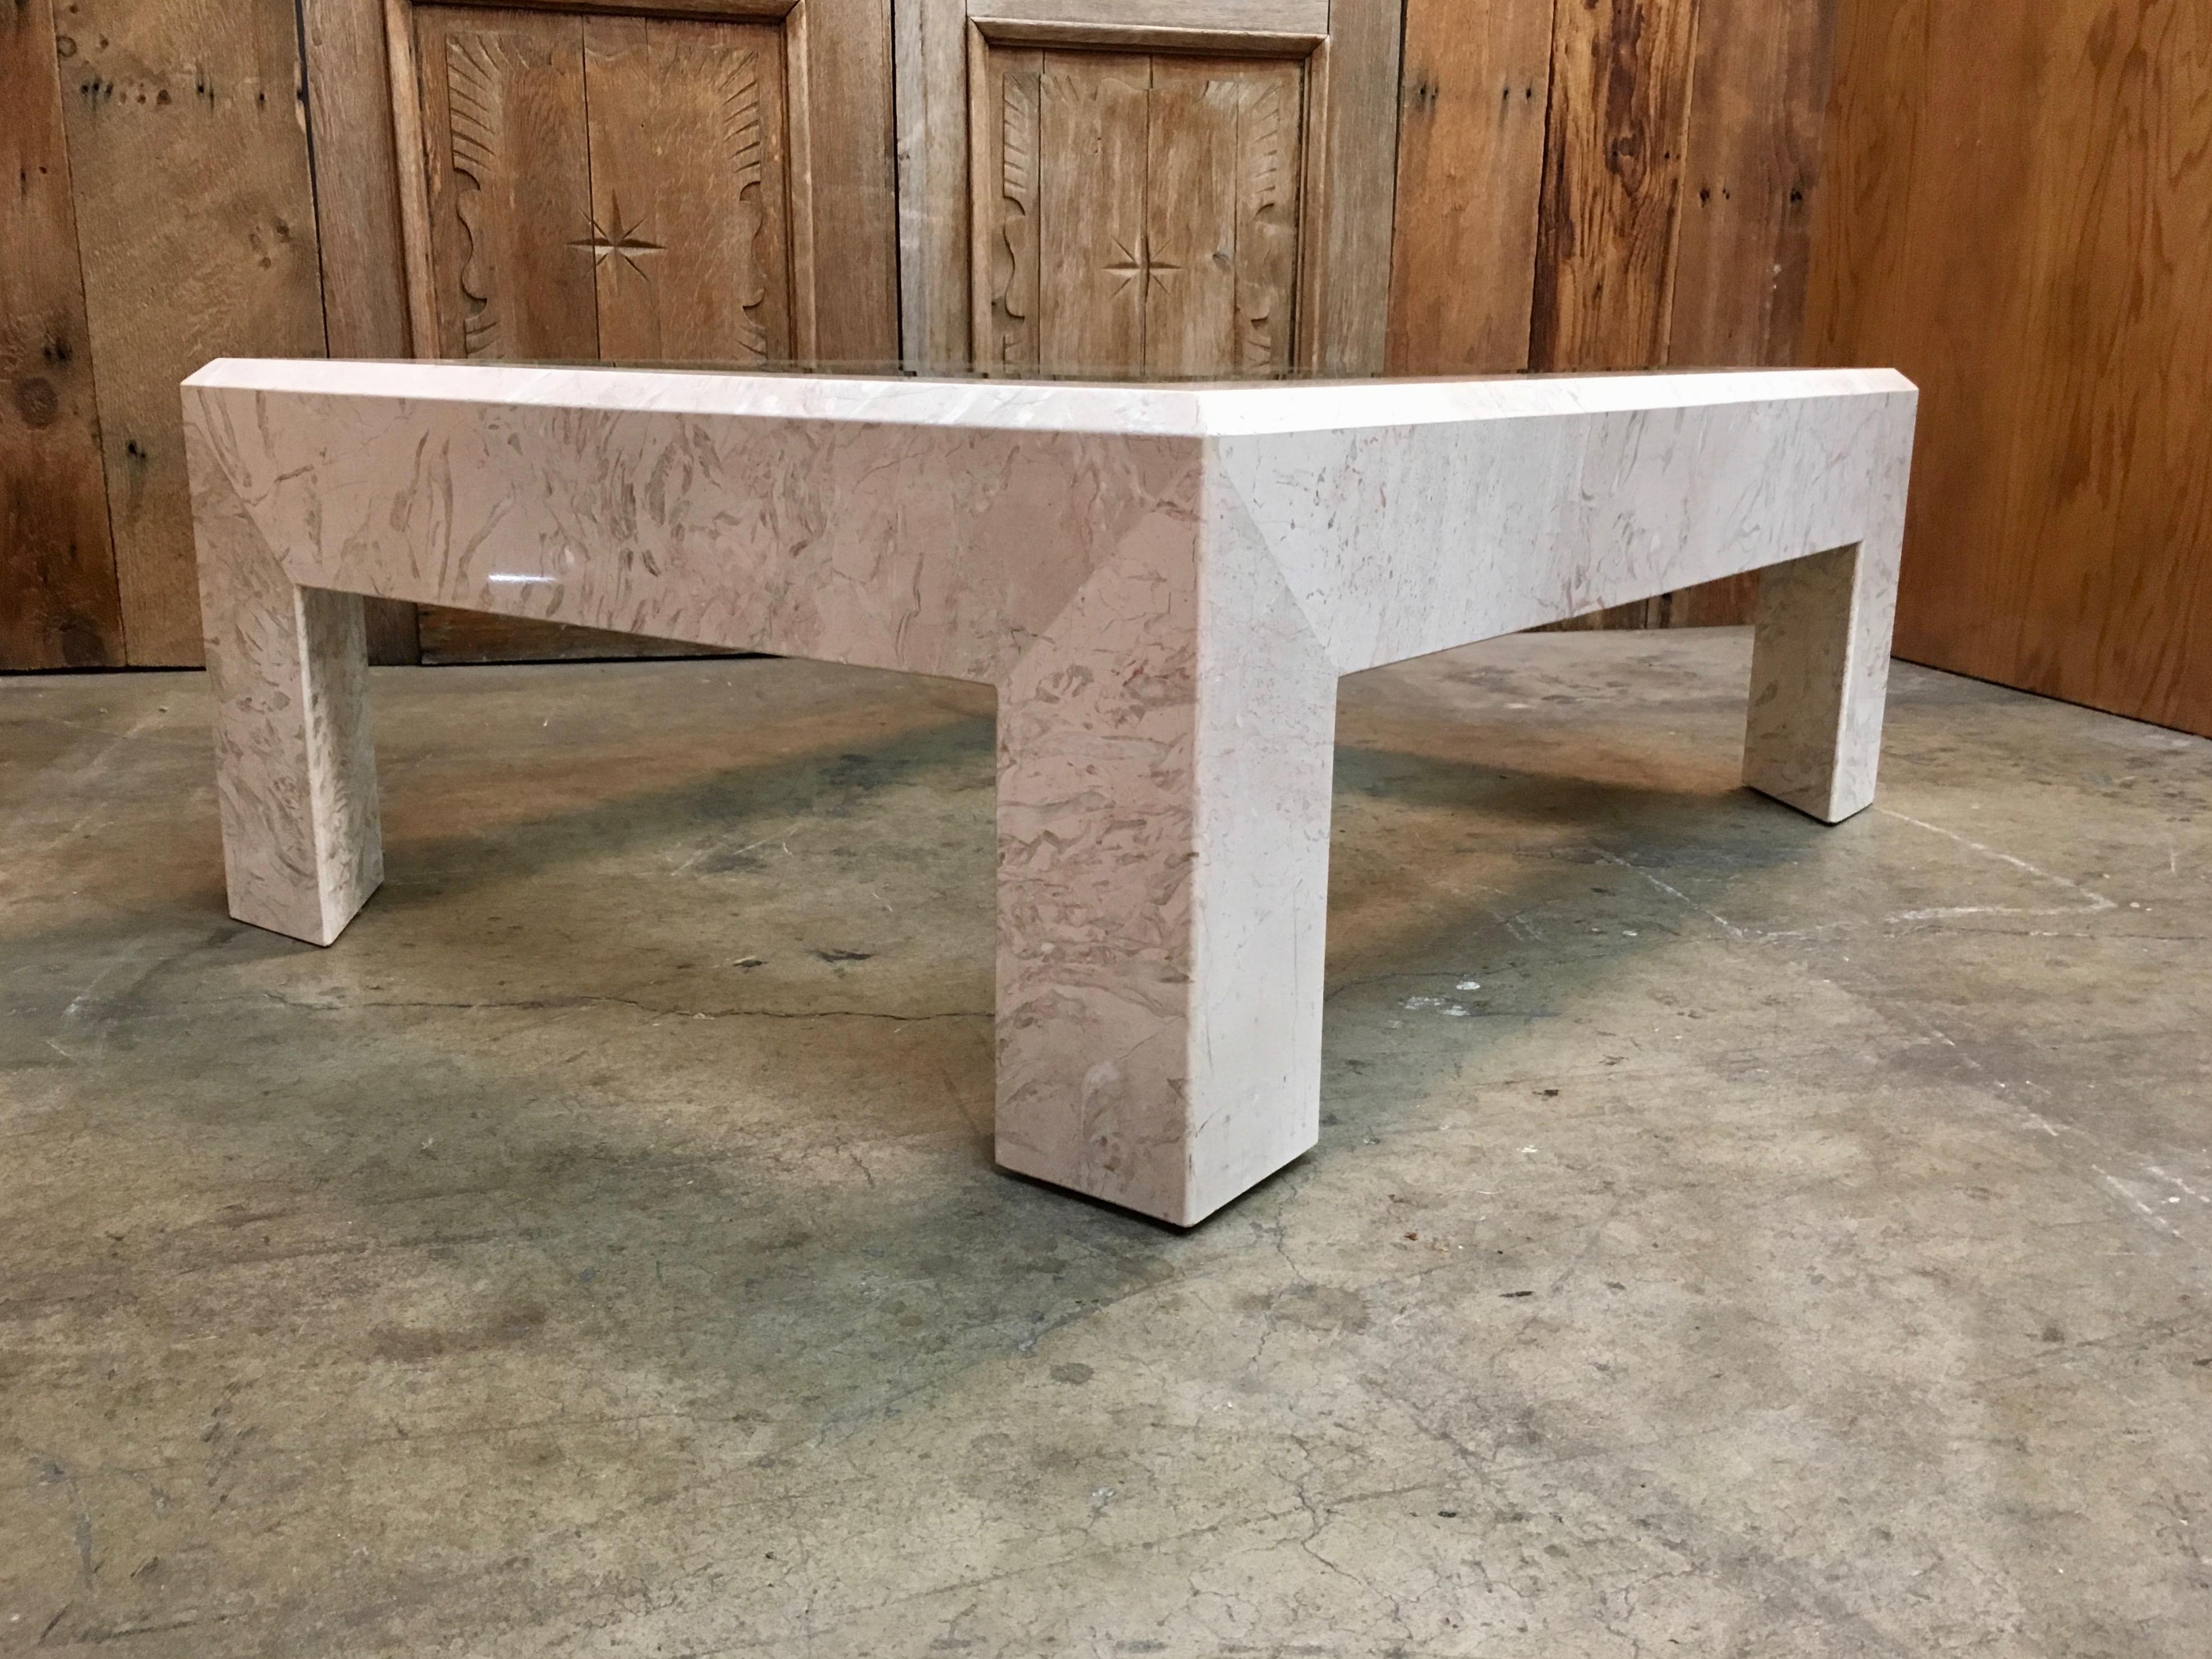 1980s massive marble cocktail table with beveled glass center insert.